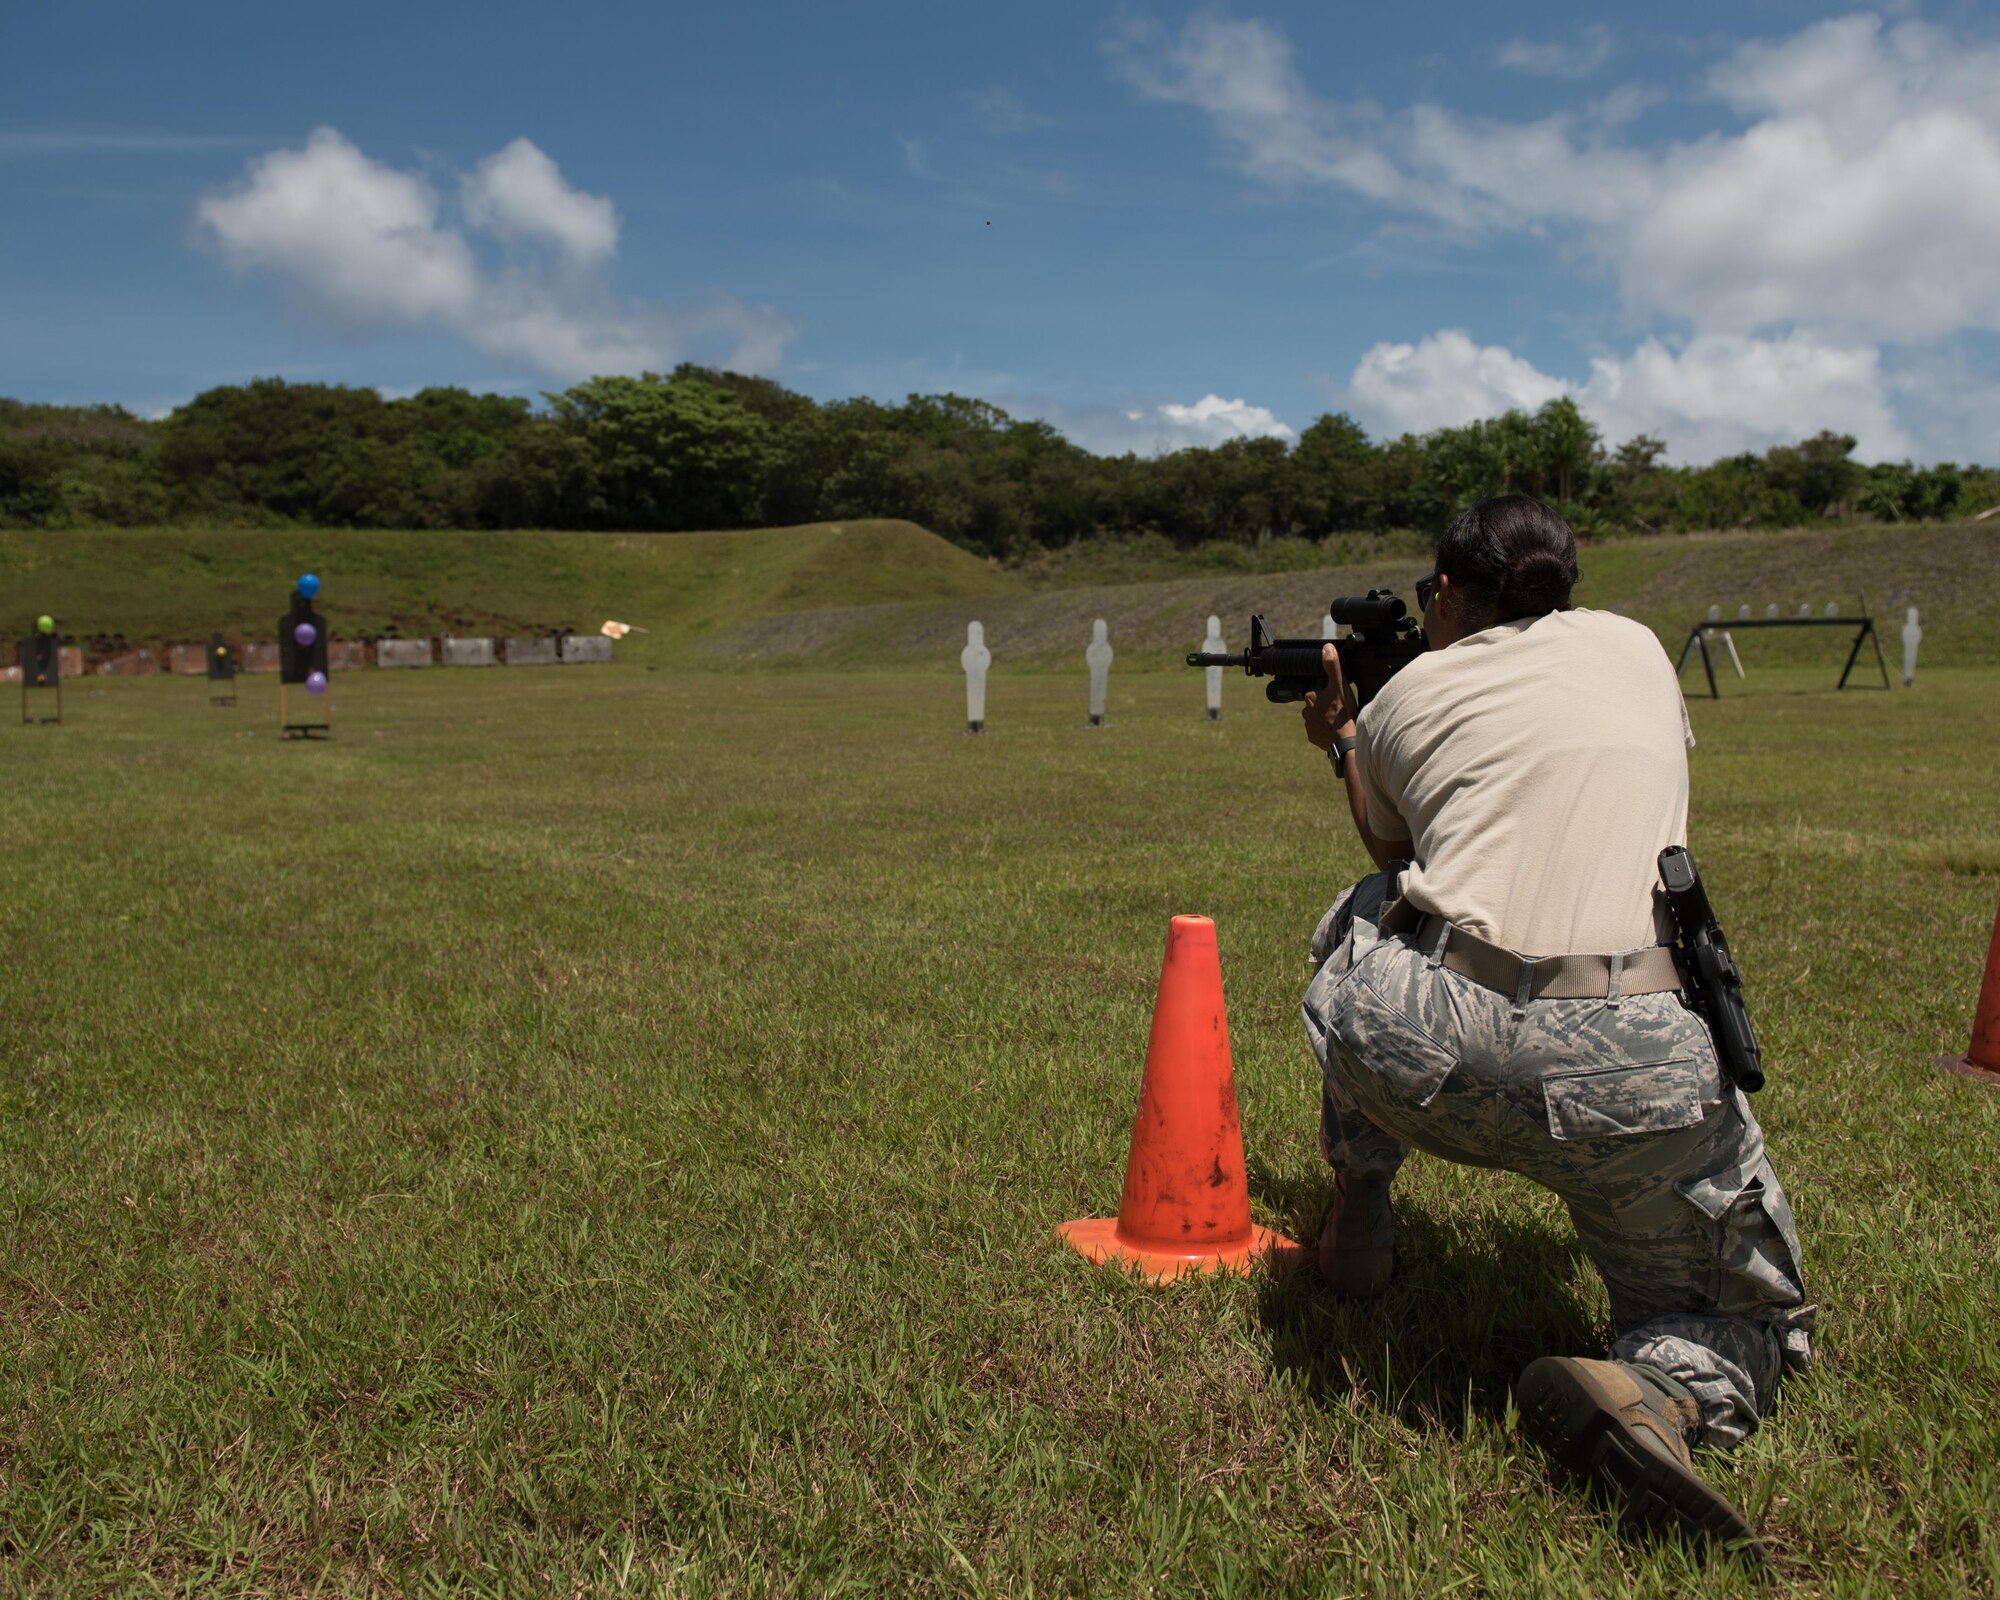 U.S. Air Force Tech. Sgt. Yerida Vazquez, 36th Security Forces Squadron NCO in charge of combat arms, fires an M4 carbine at balloon targets April 29, 2017, at Naval Computer and Telecommunications Station, Guam. The balloons, varying sizes and movement in the wind, increased the difficulty of the rifle portion of the three gun shoot-off. (U.S. Air Force photo by Airman 1st Class Jacob Skovo)